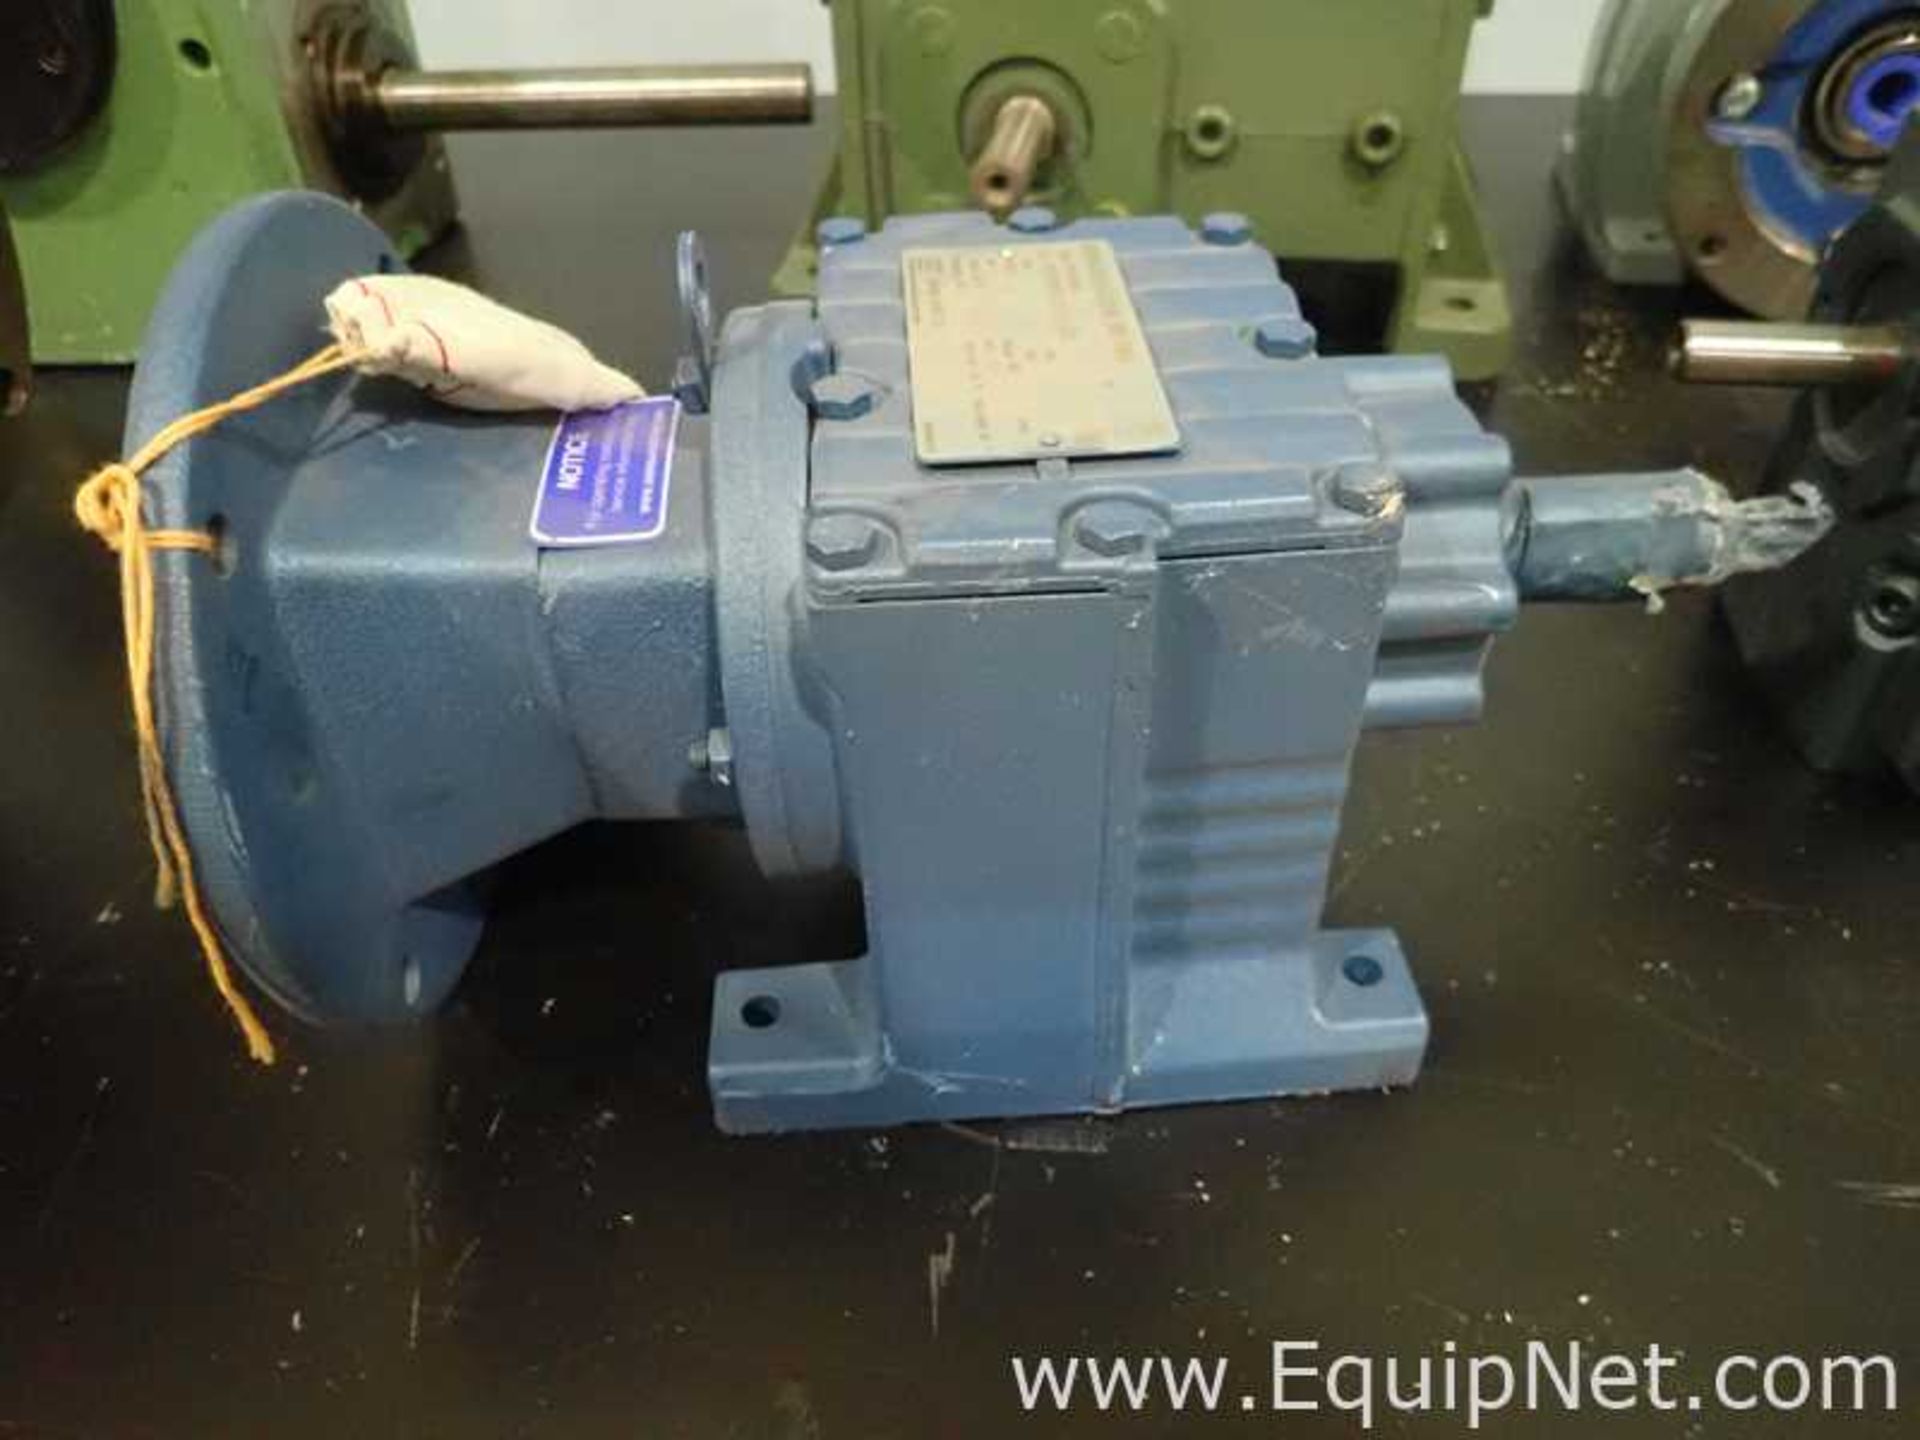 EQUIPNET LISTING #793447; REMOVAL COST: $25; DESCRIPTION: Lot of 6 Various Gear BoxesLot - Image 2 of 13